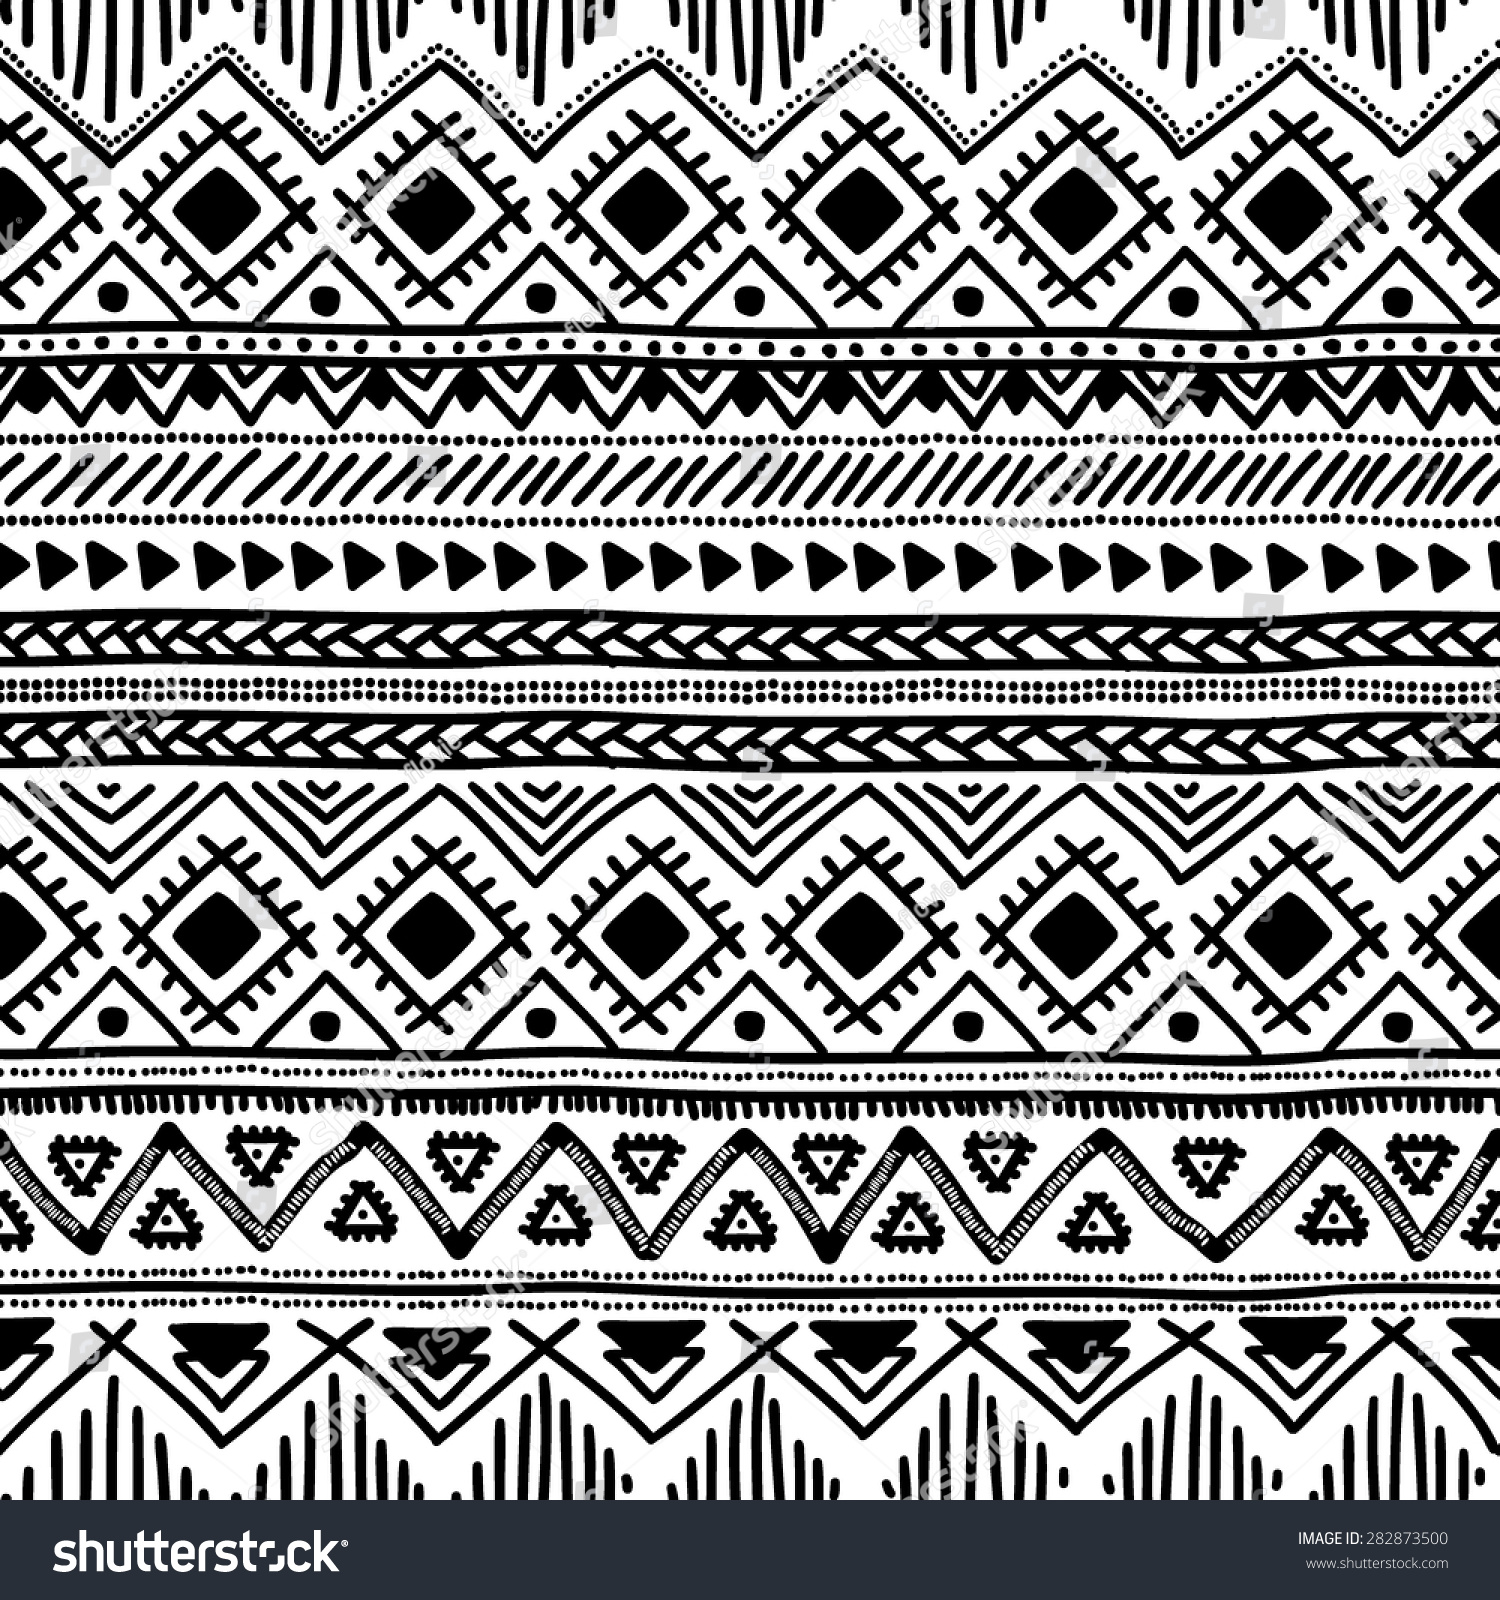 Seamless Ethnic Pattern. Black And White Vector Illustration ...